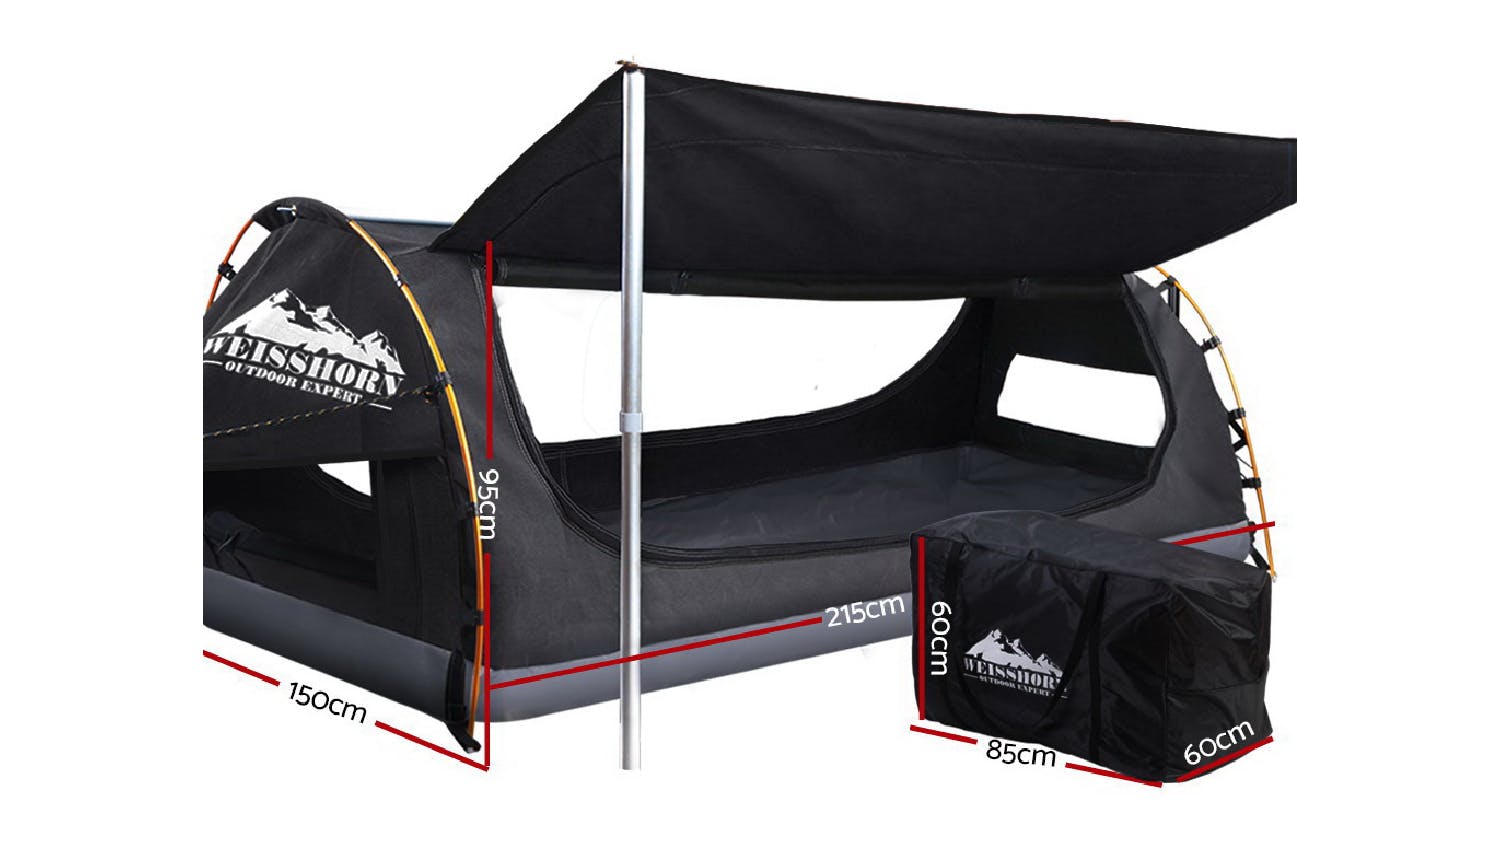 Weisshorn Camping Swag Canvas Tent Double Awning - Black